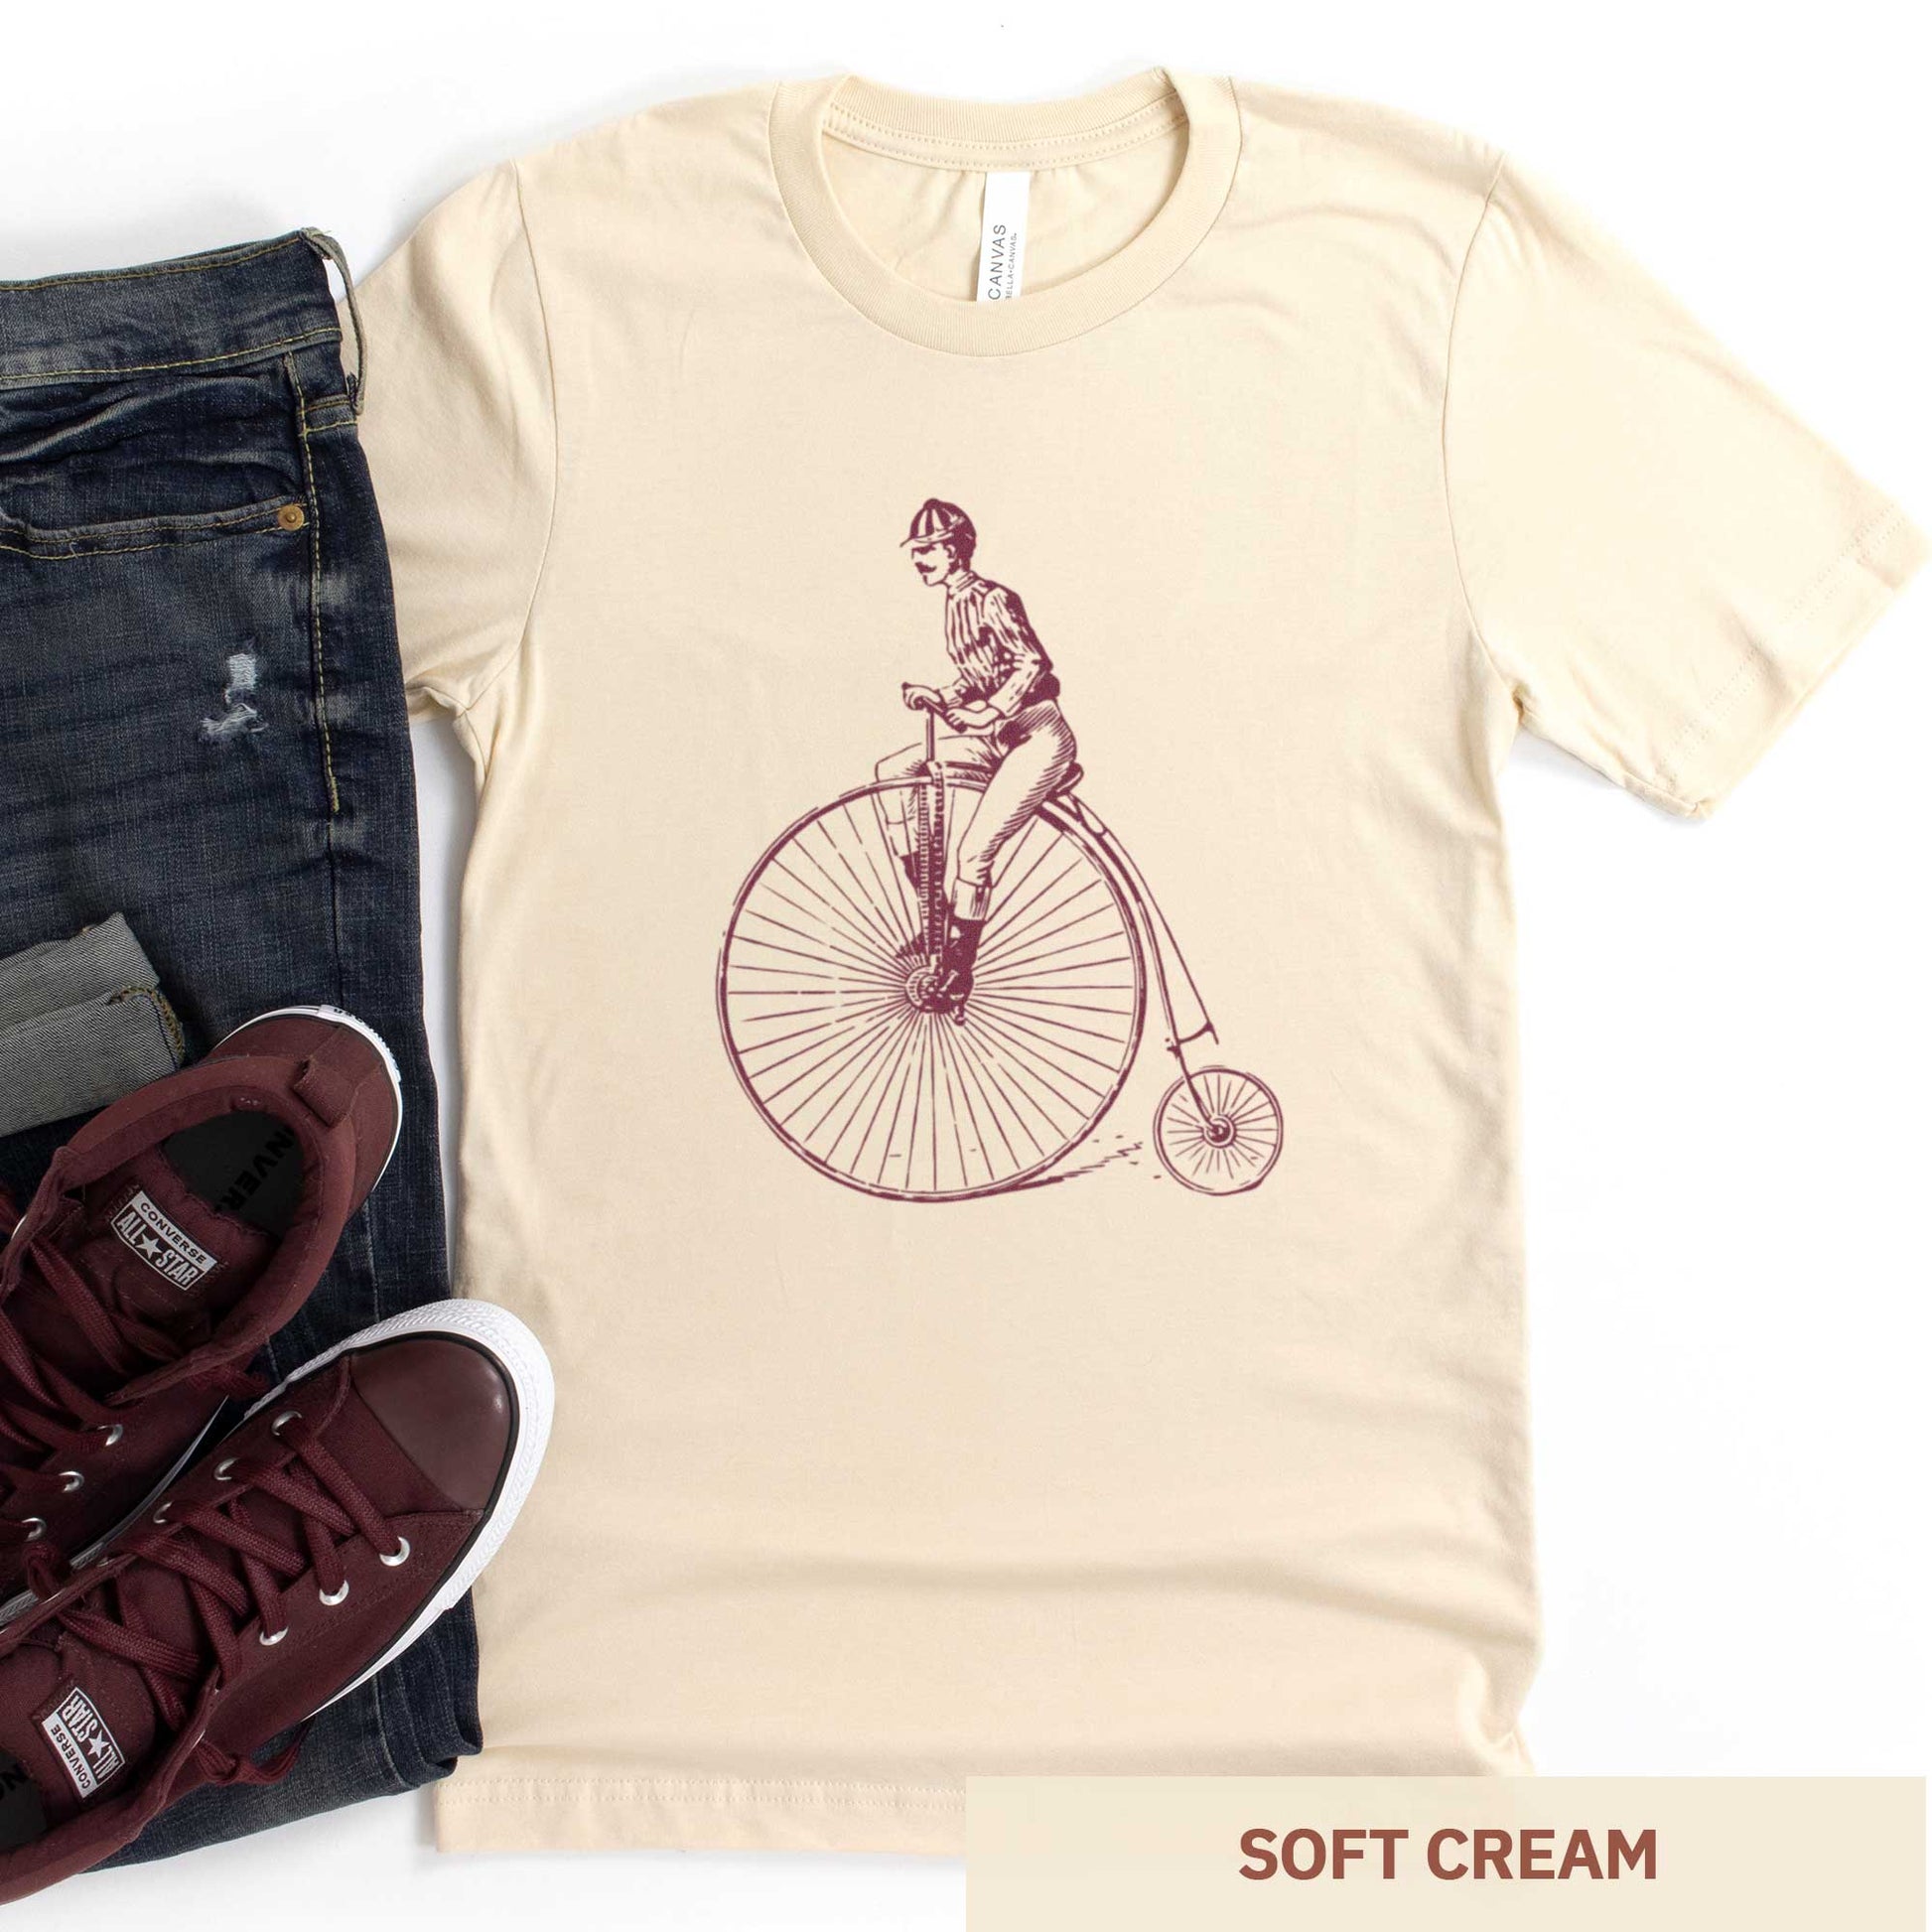 A soft cream Bella Canvas t-shirt featuring a Victorian man riding a penny farthing bicycle.